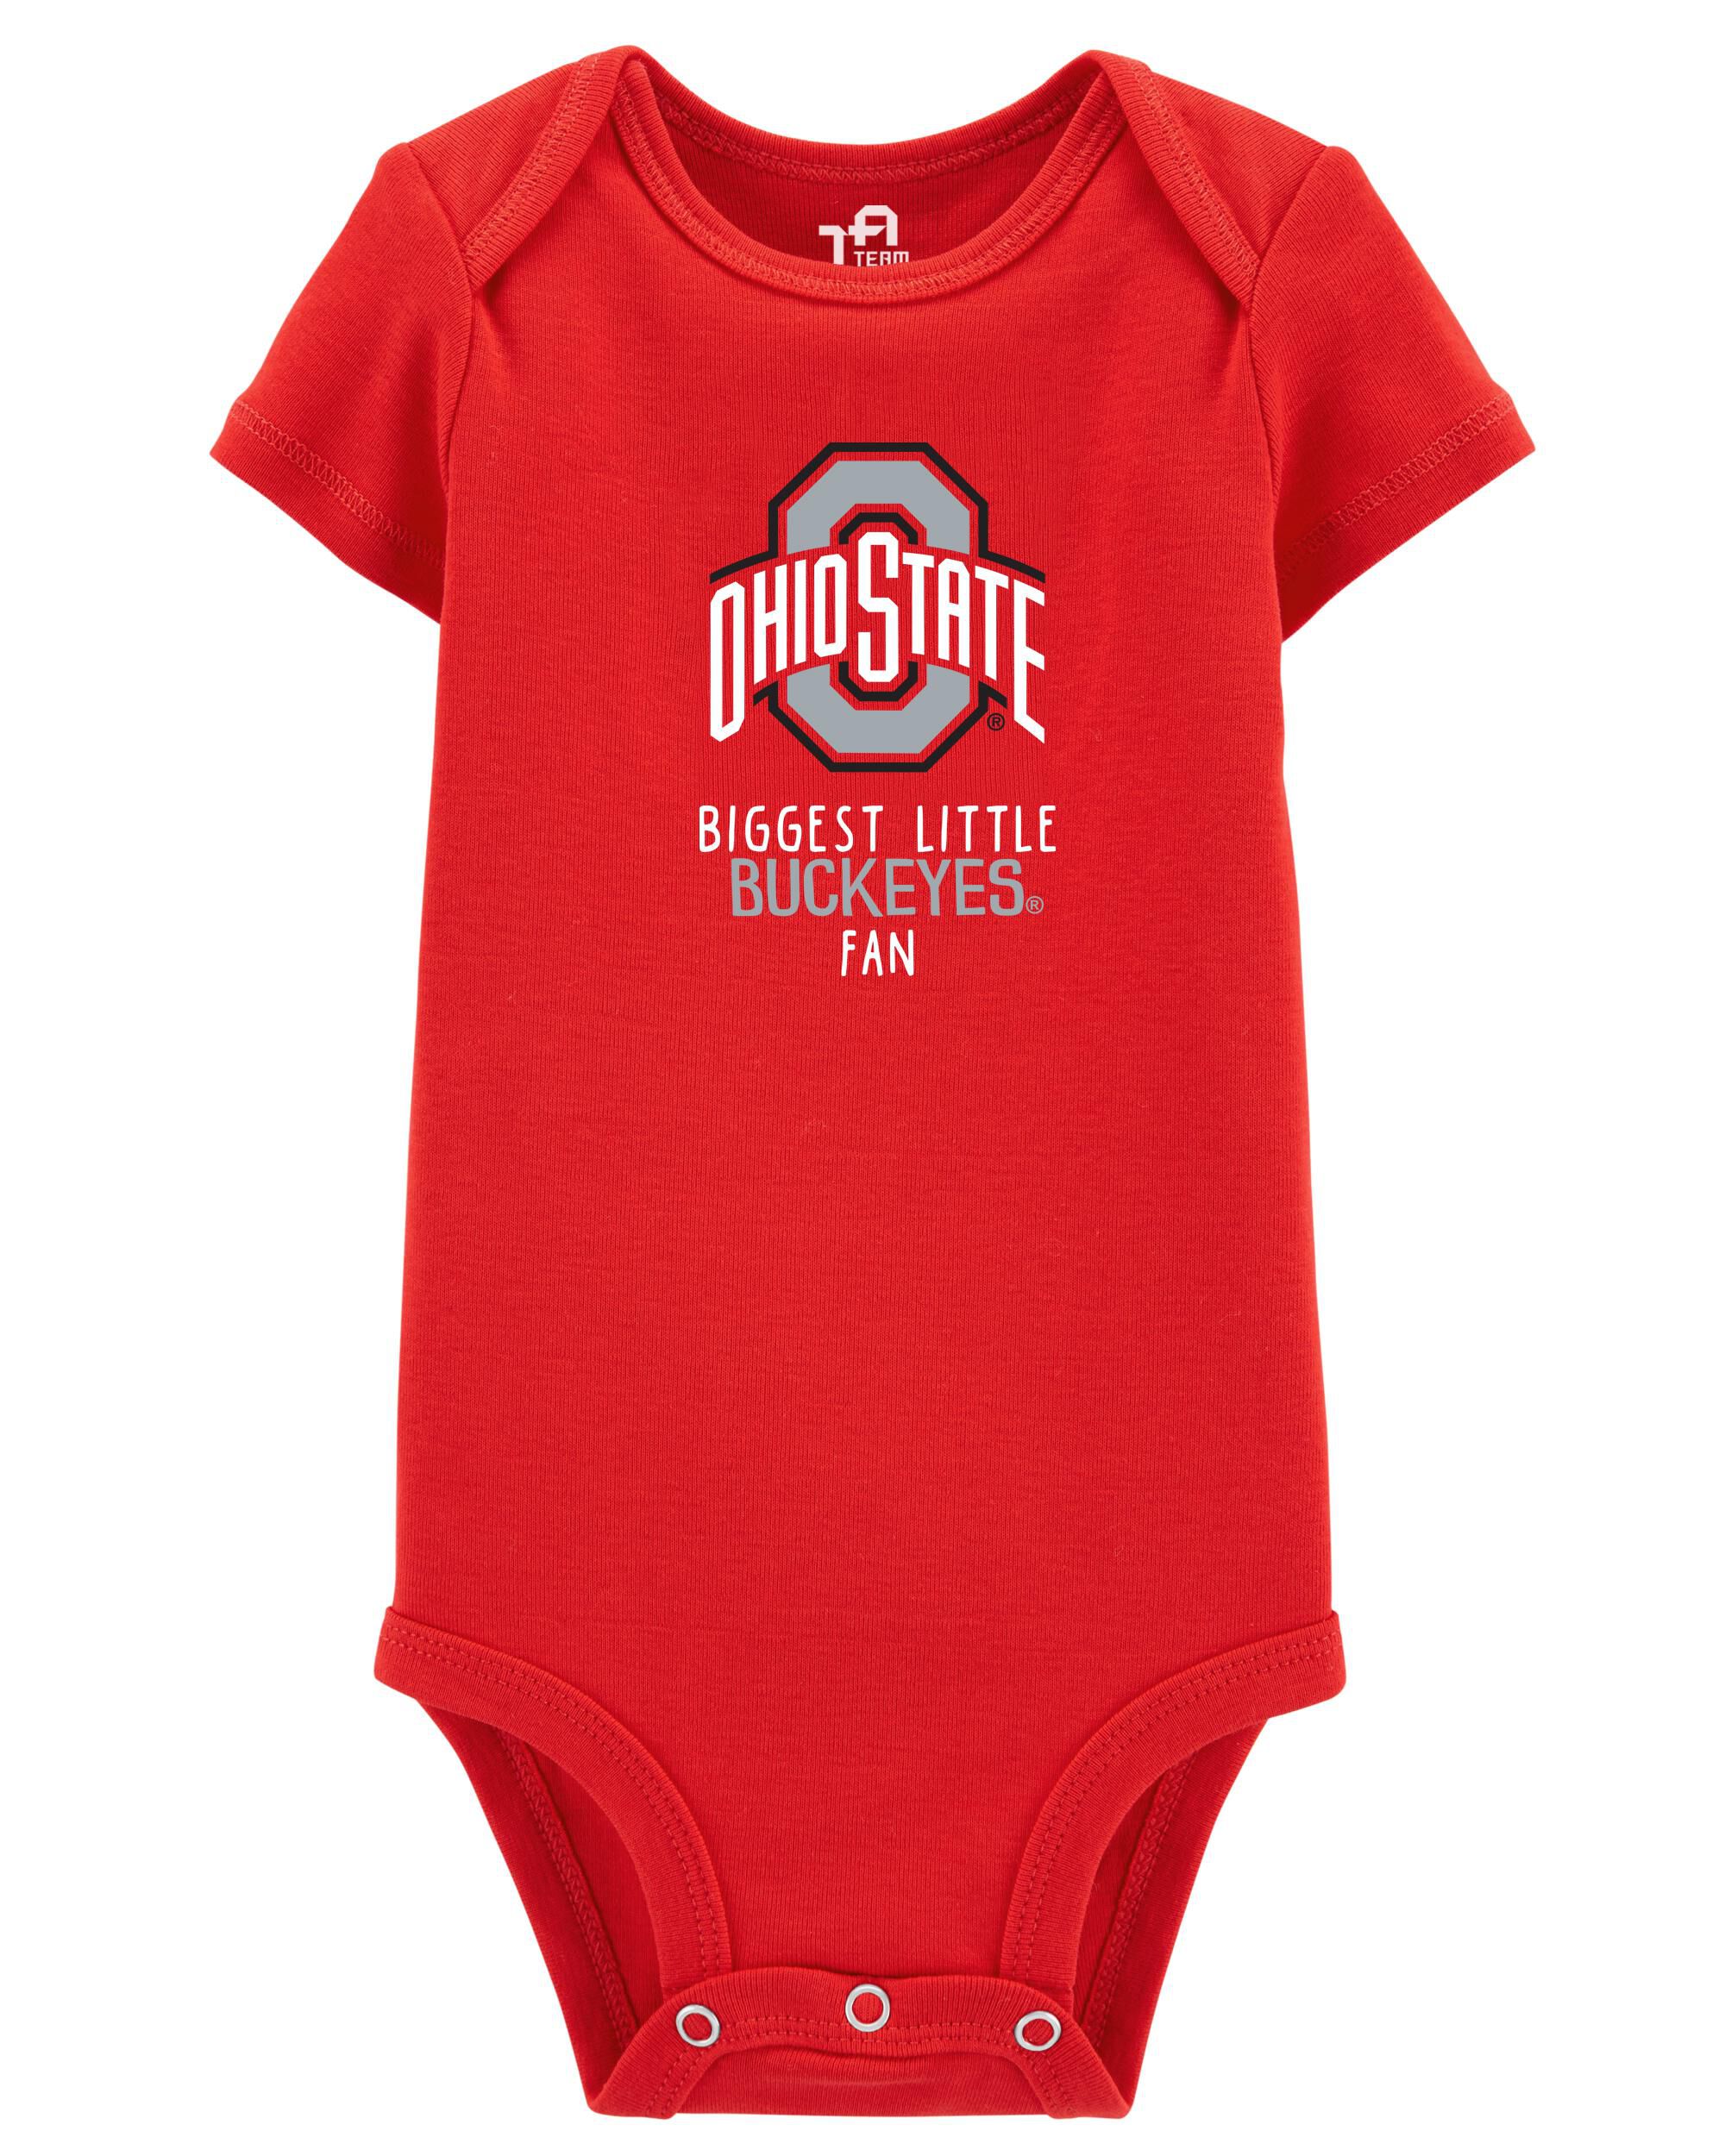 NCAA Ohio State Buckeyes Infant One Piece 12 Months Bodysuit White and Pink